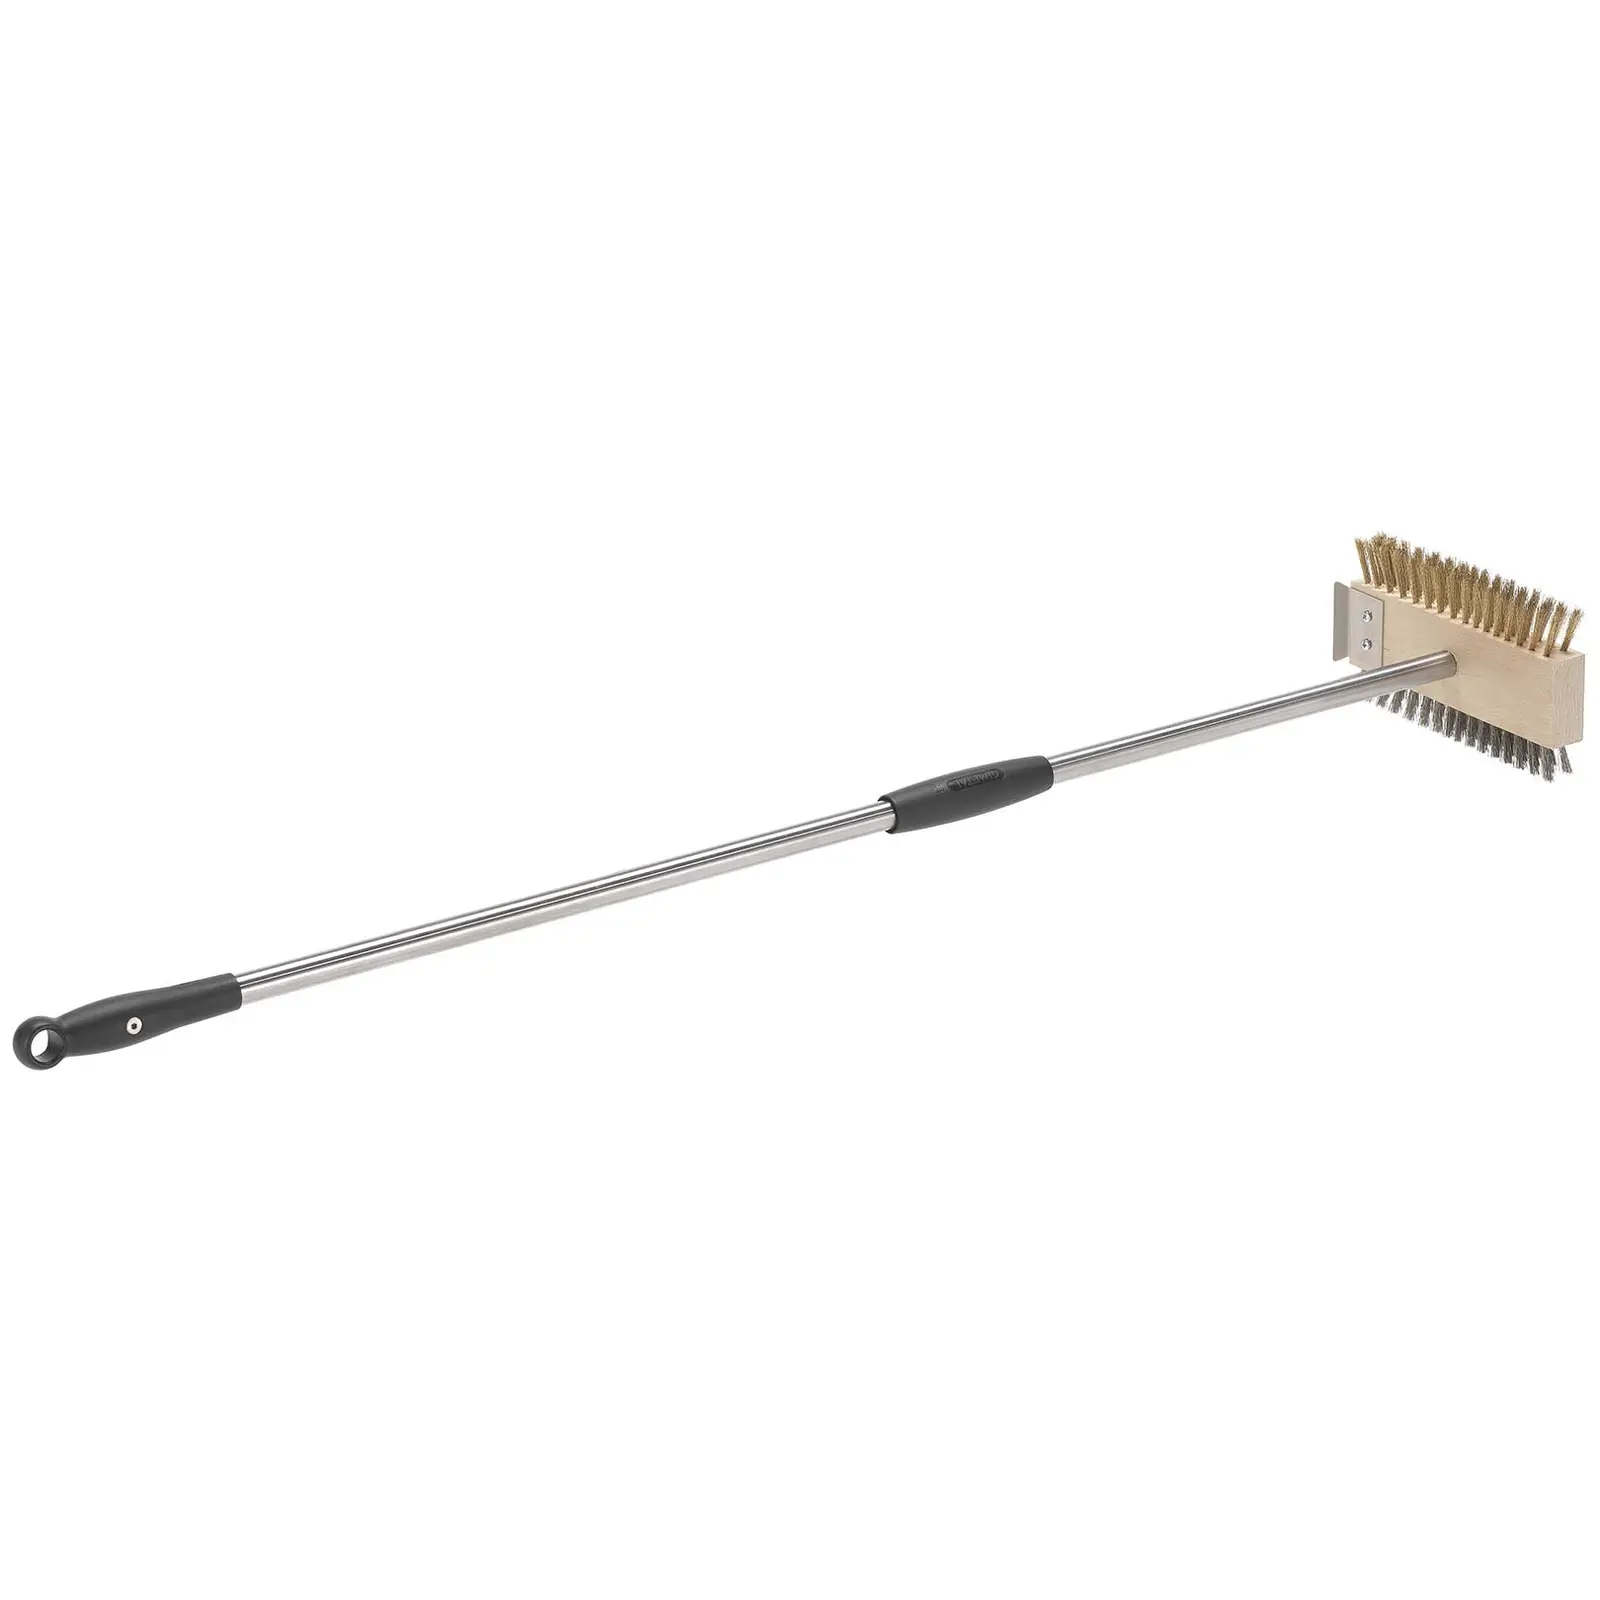 Pizza Oven Brush - double brush 20 x 11.7 cm - stainless steel handle 100 cm